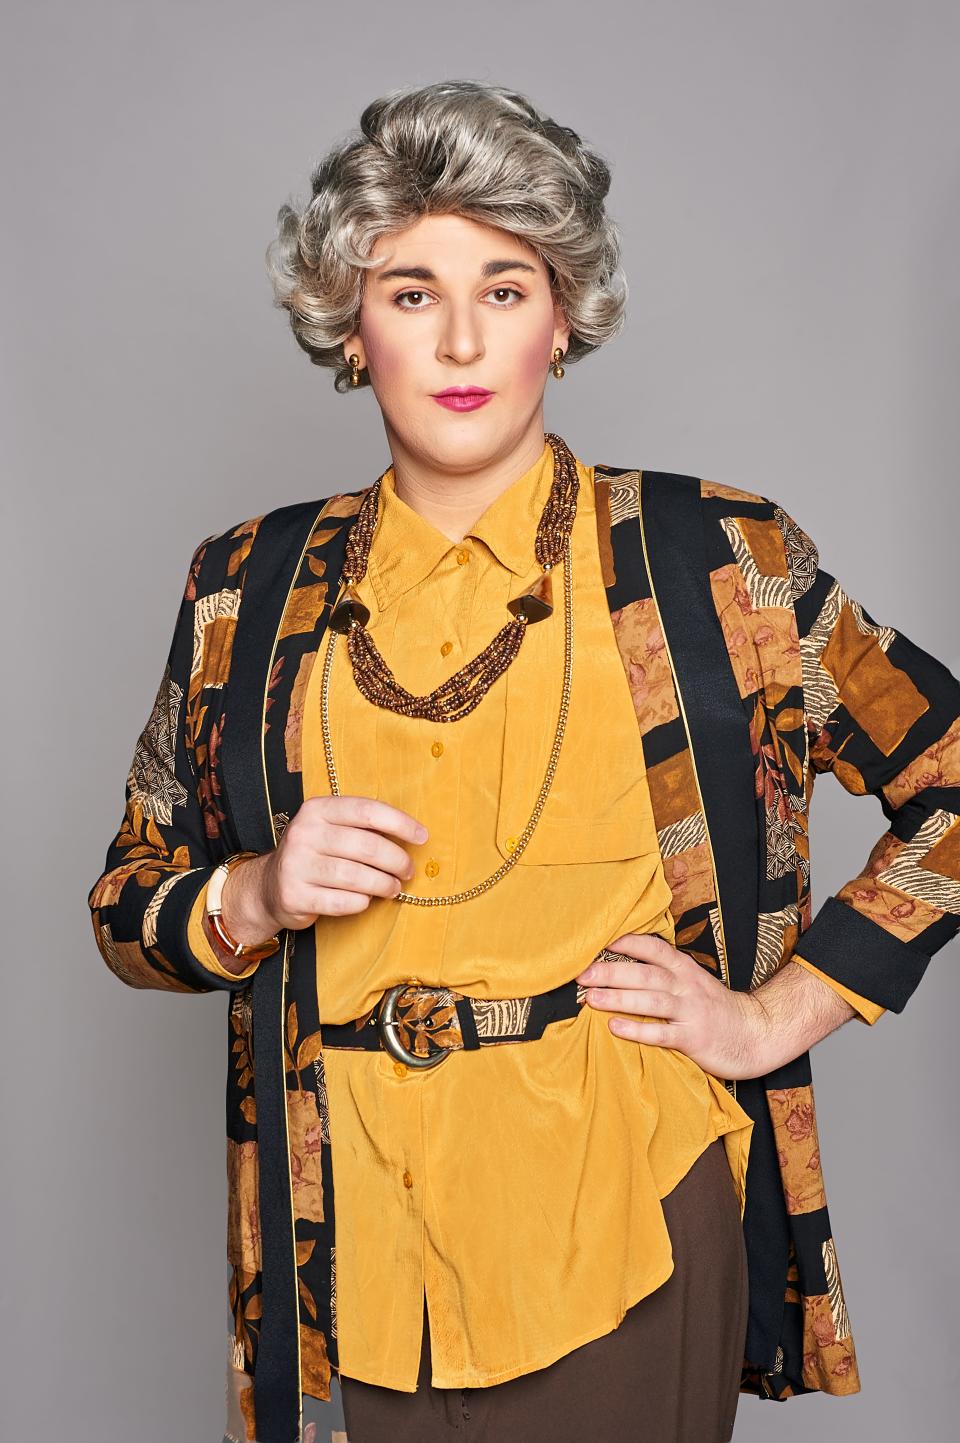 Ryan Bernier plays Dorothy in the touring company of "Golden Girls: The Laughs Continue," coming to the Hanover Theatre.